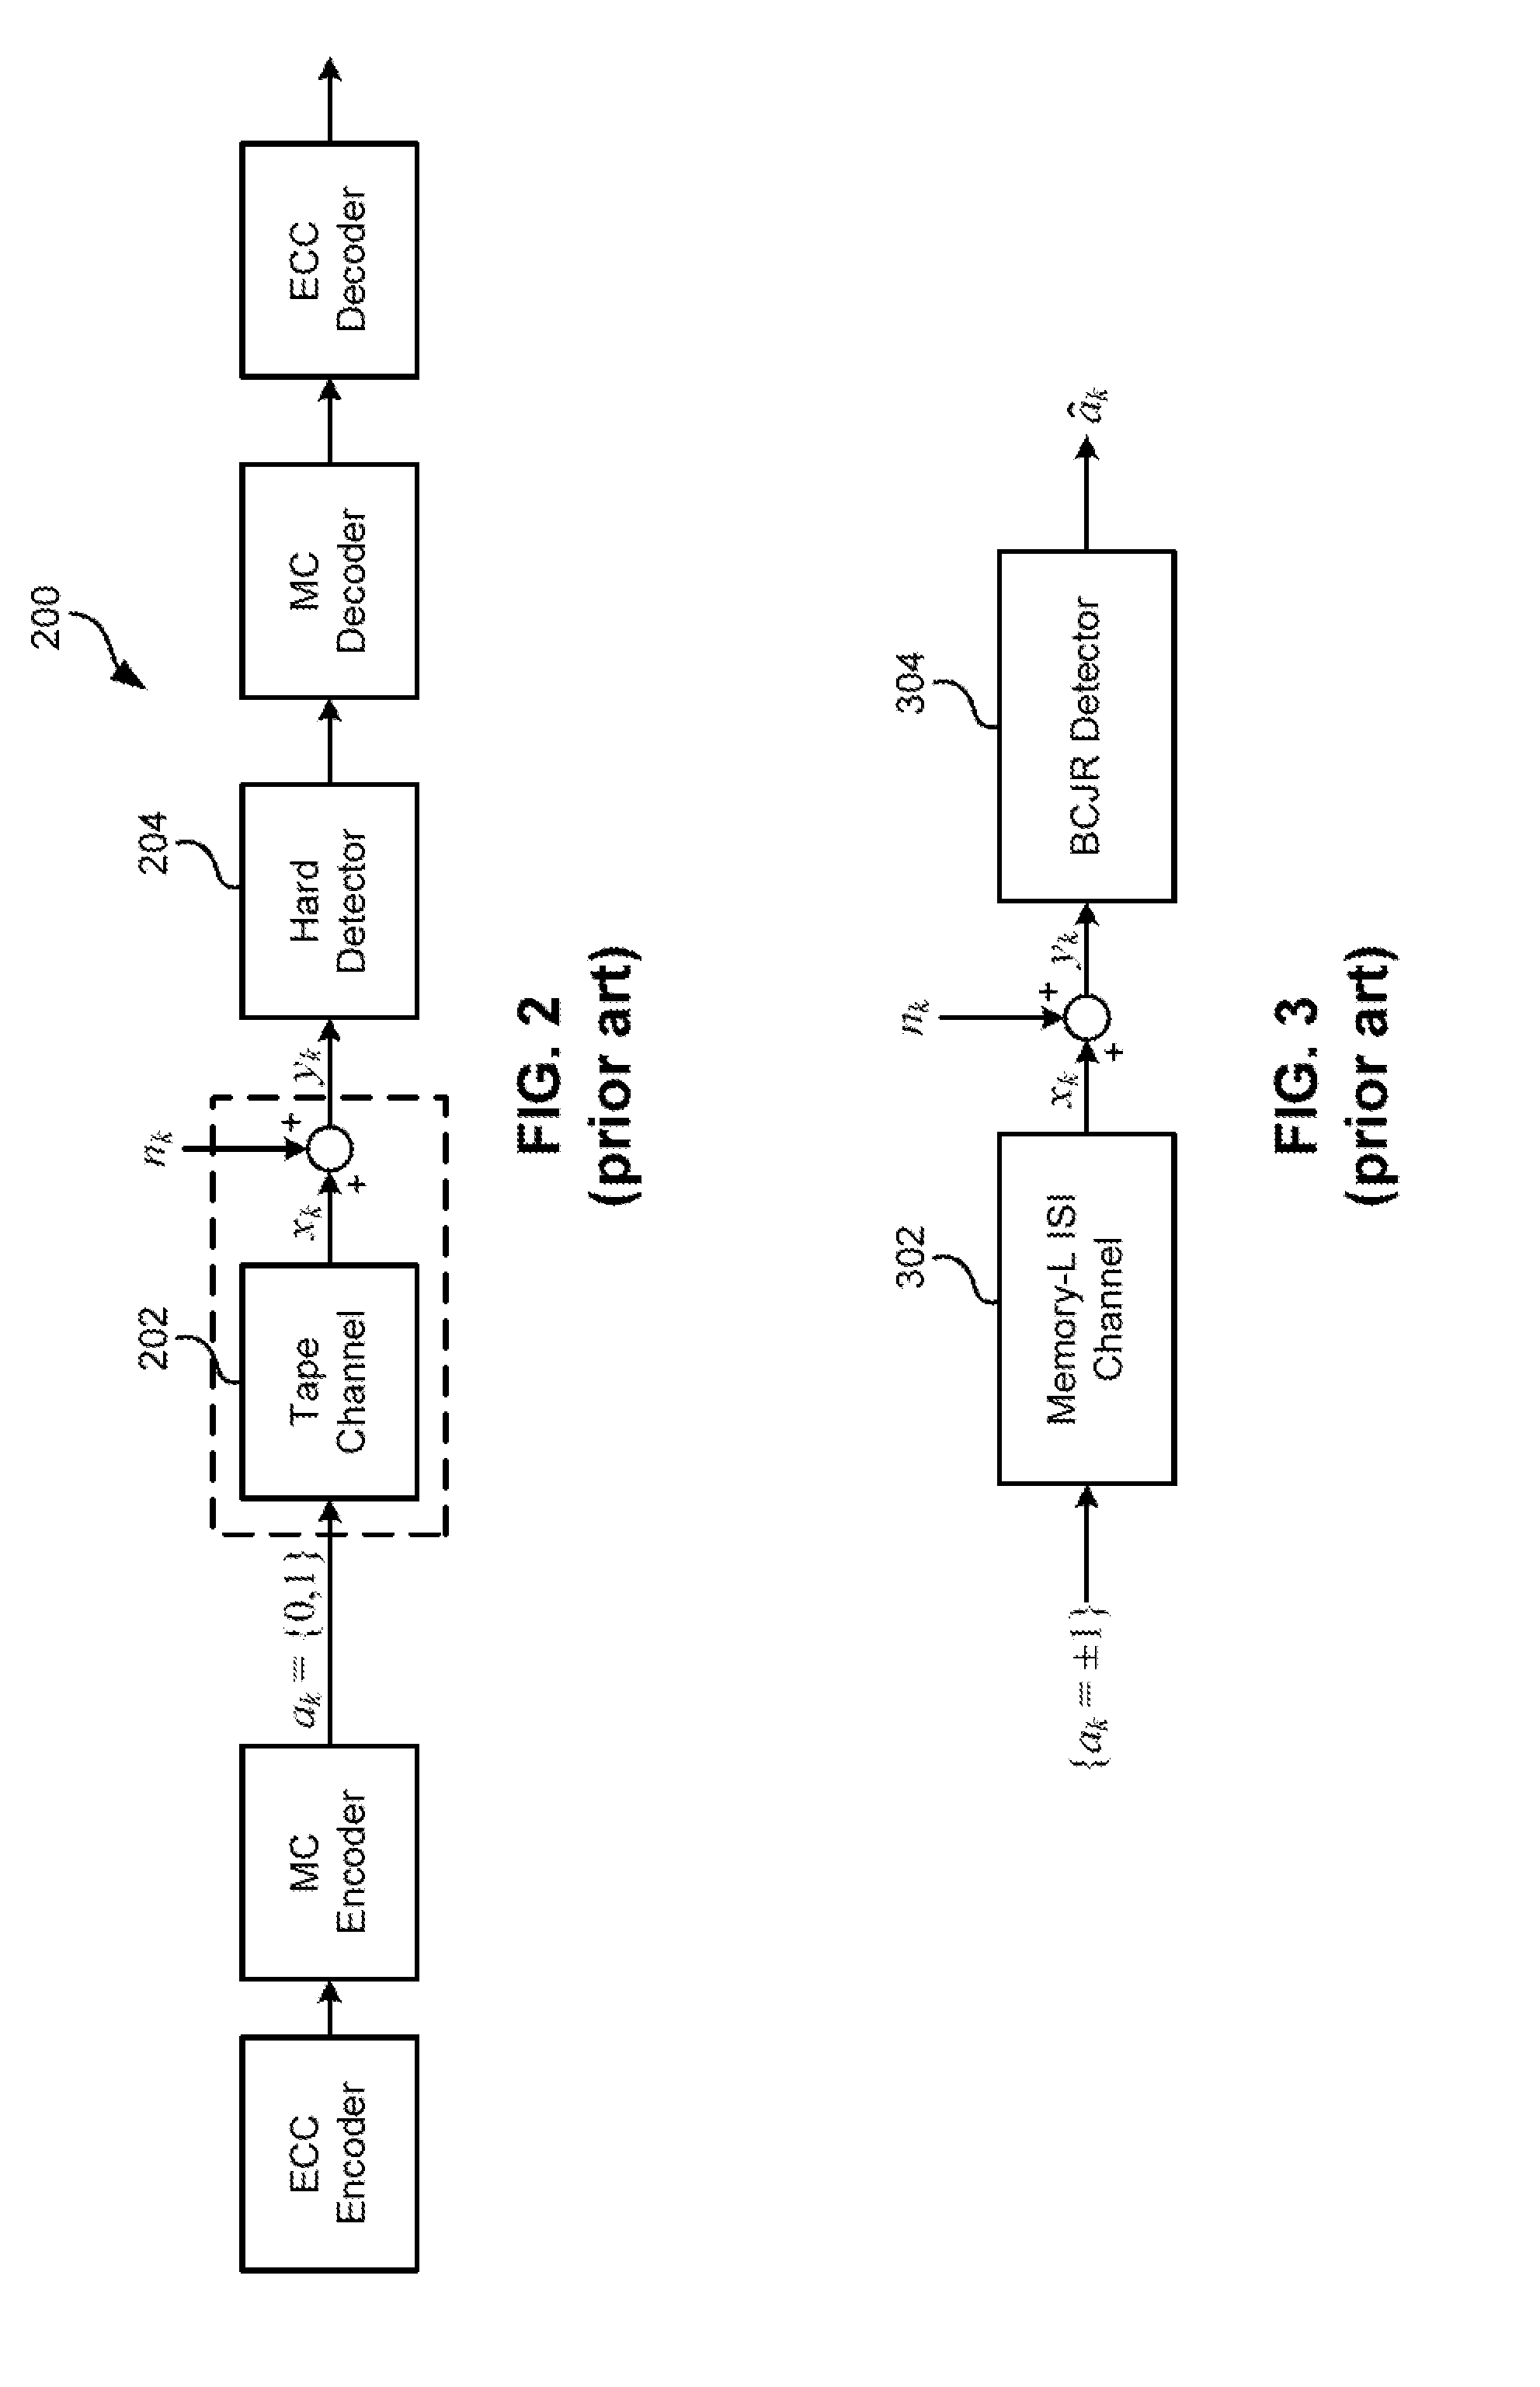 Adaptive soft-output detector for magnetic tape read channels